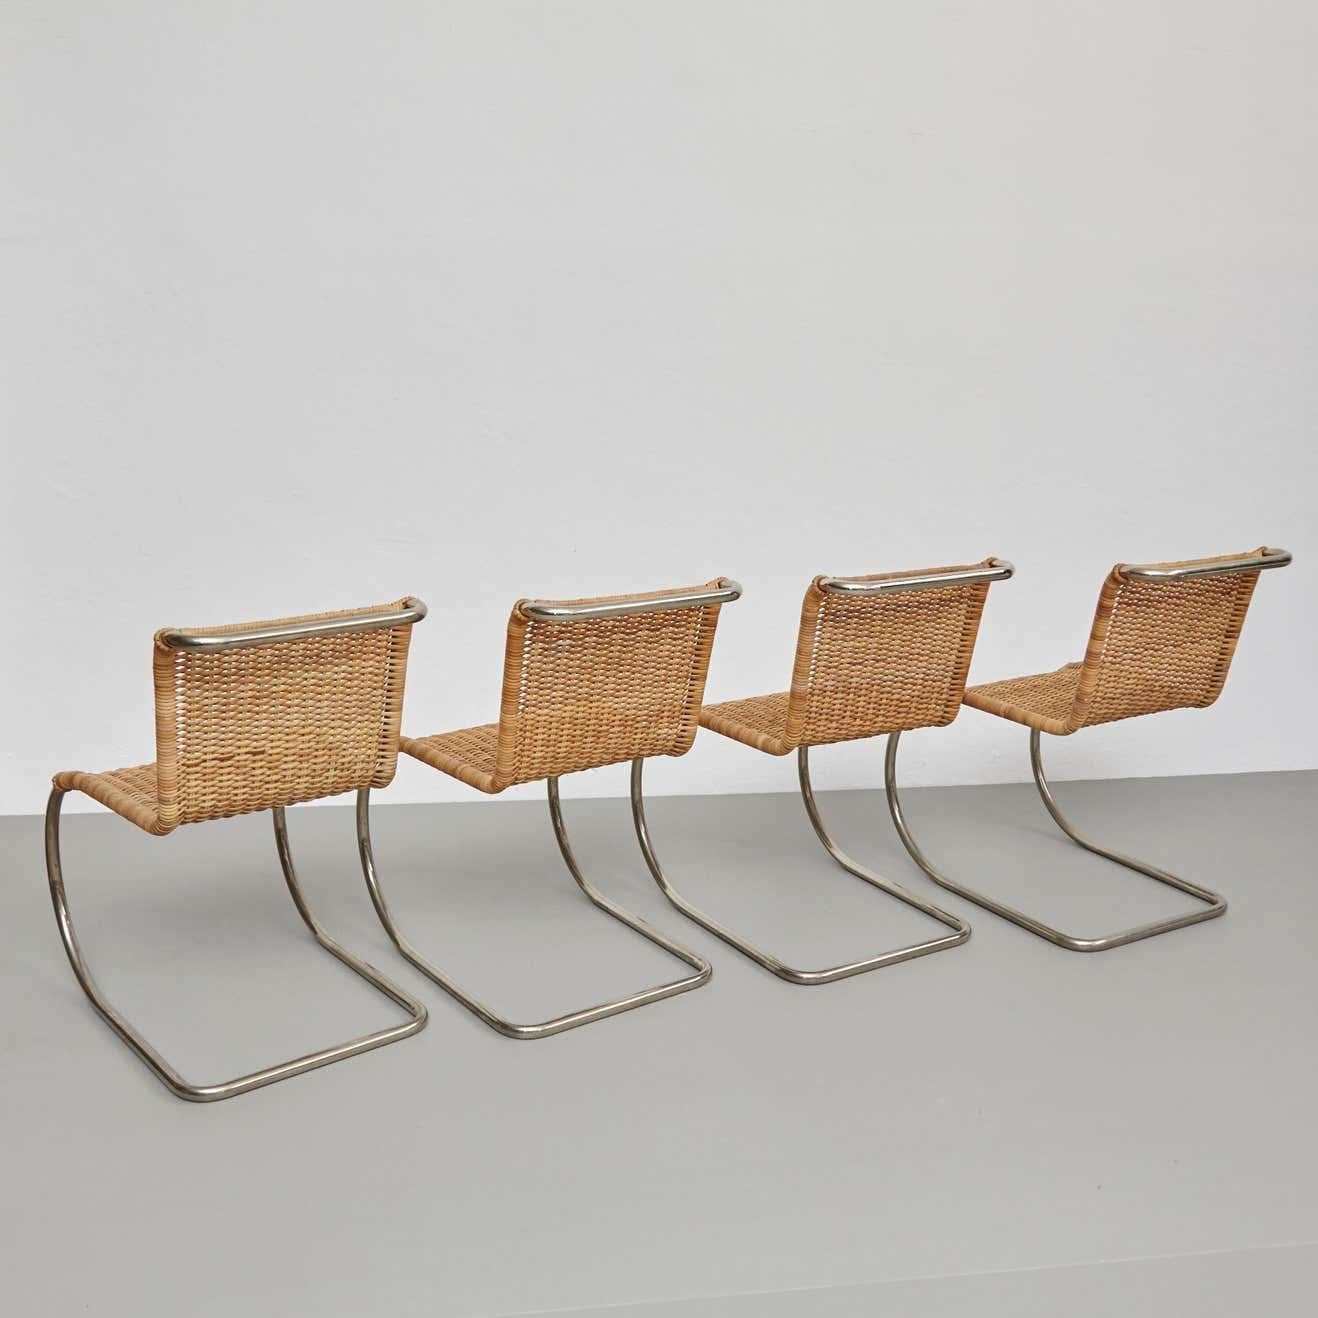 This set of four MR10 chairs designed by Ludwig Mies van der Rohe in 1927 is a true masterpiece of modern design. Manufactured by Tecta in Germany circa 1960, these chairs are a testament to the enduring popularity of Mies van der Rohe's innovative